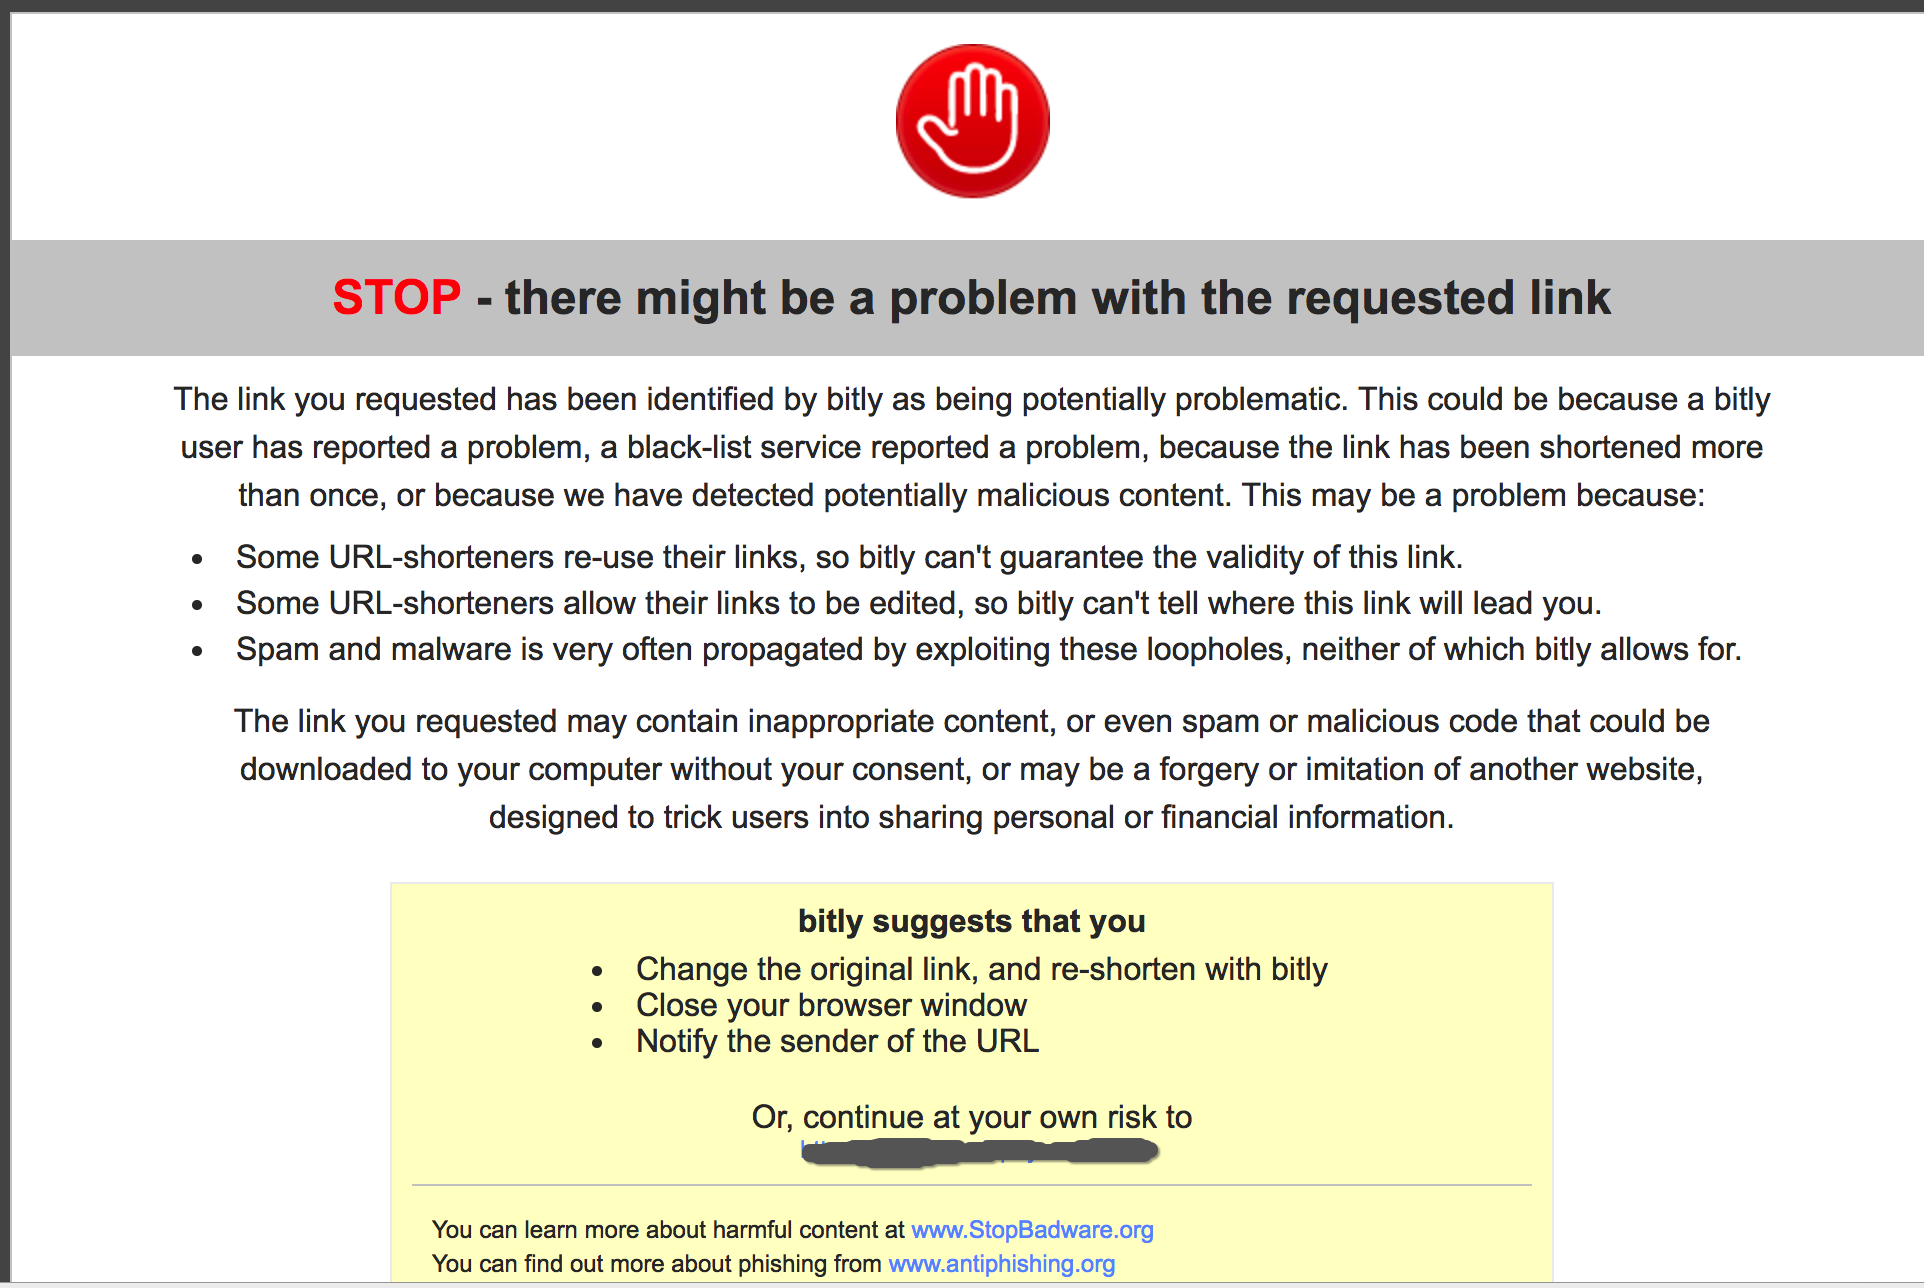 STOP - there might be a problem with the requested link